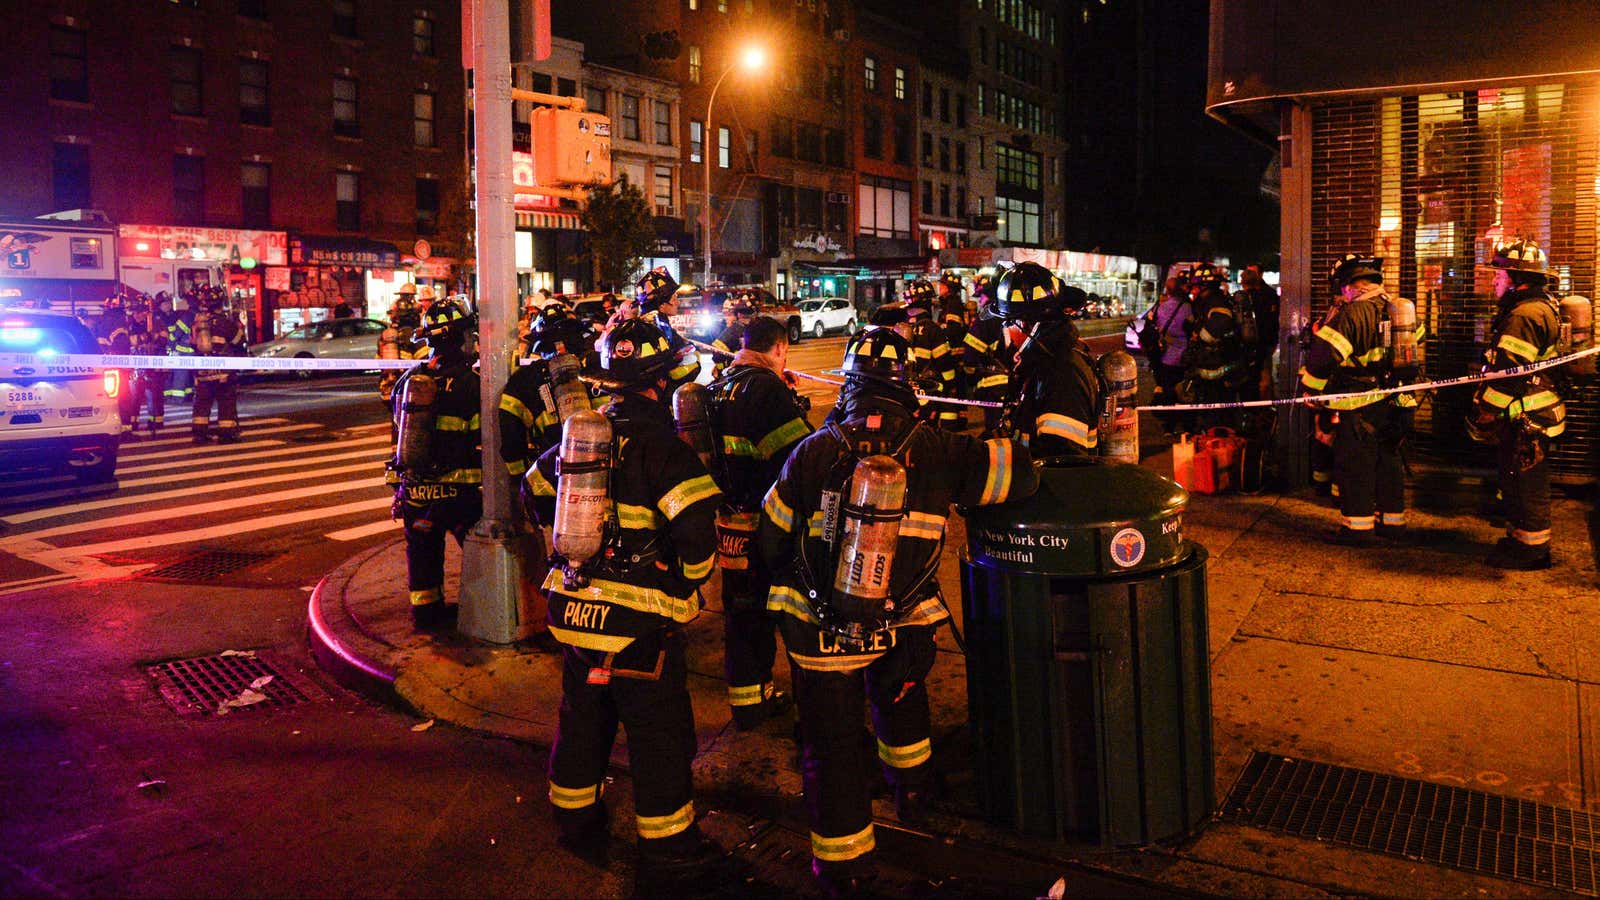 Many people in New York and New Jersey awoke to an “extreme” emergency alert related to the weekend’s explosions.